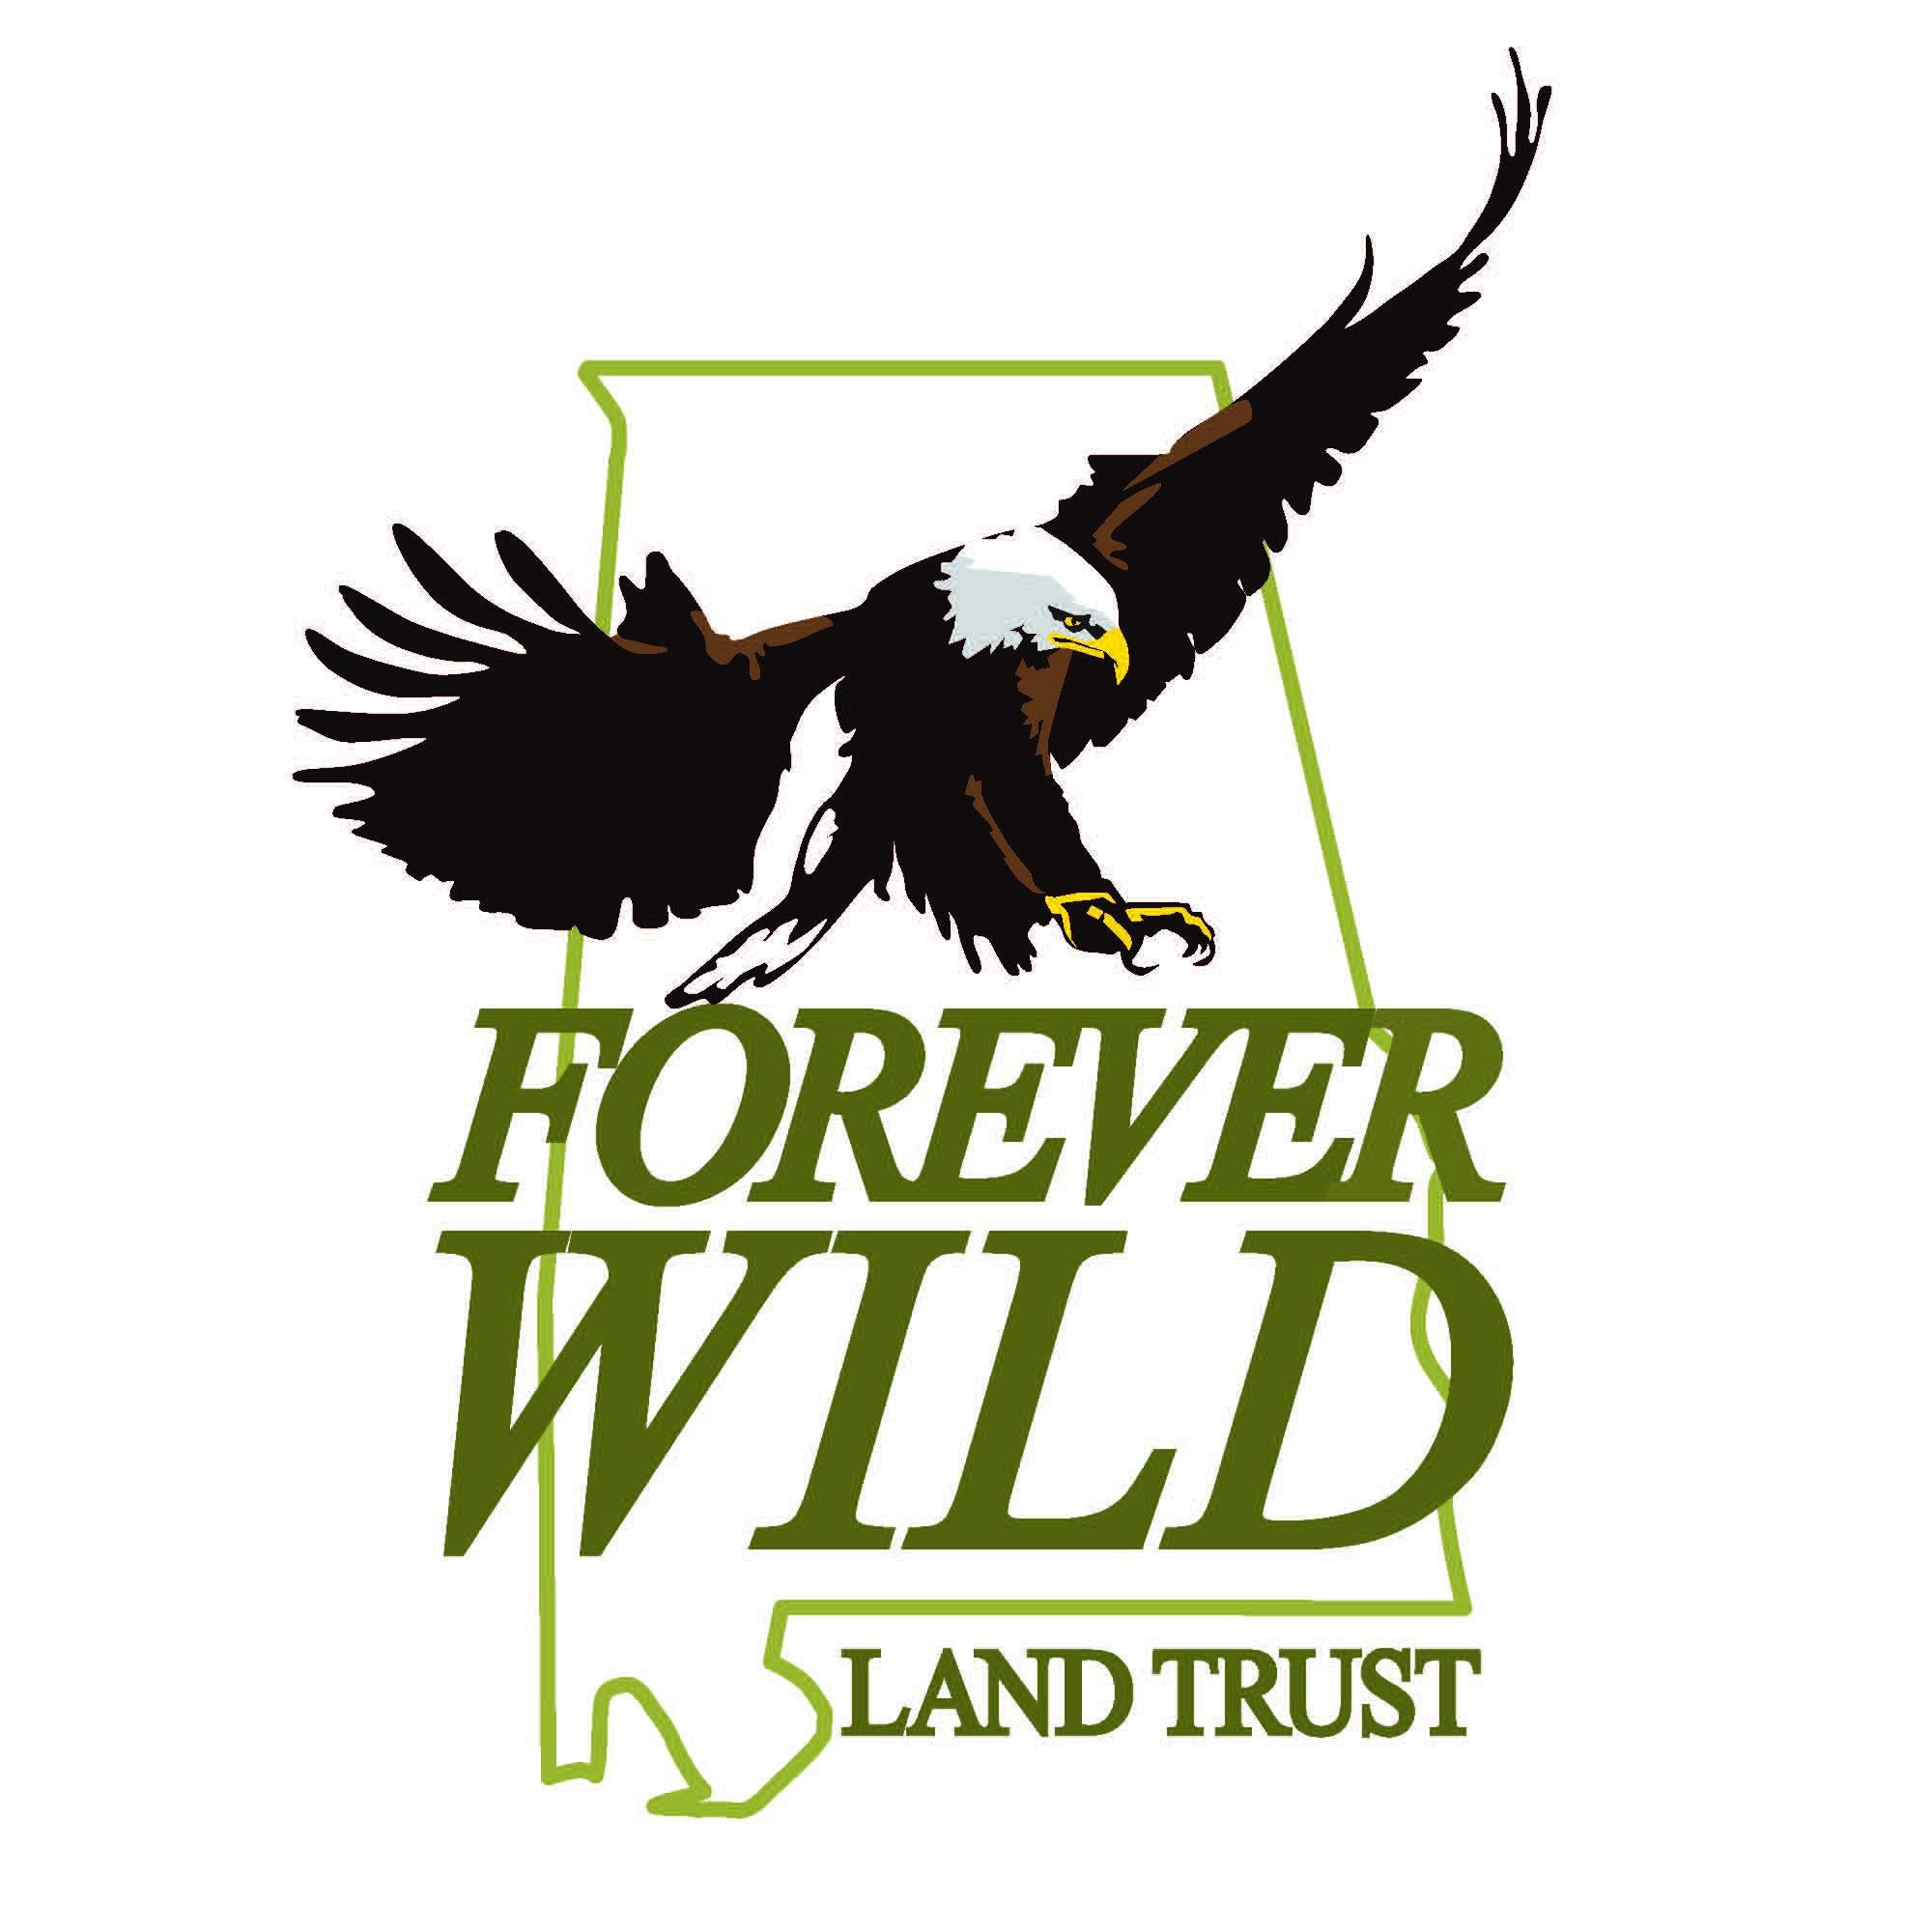 Forever Wild Board Meets in Montgomery on February 7